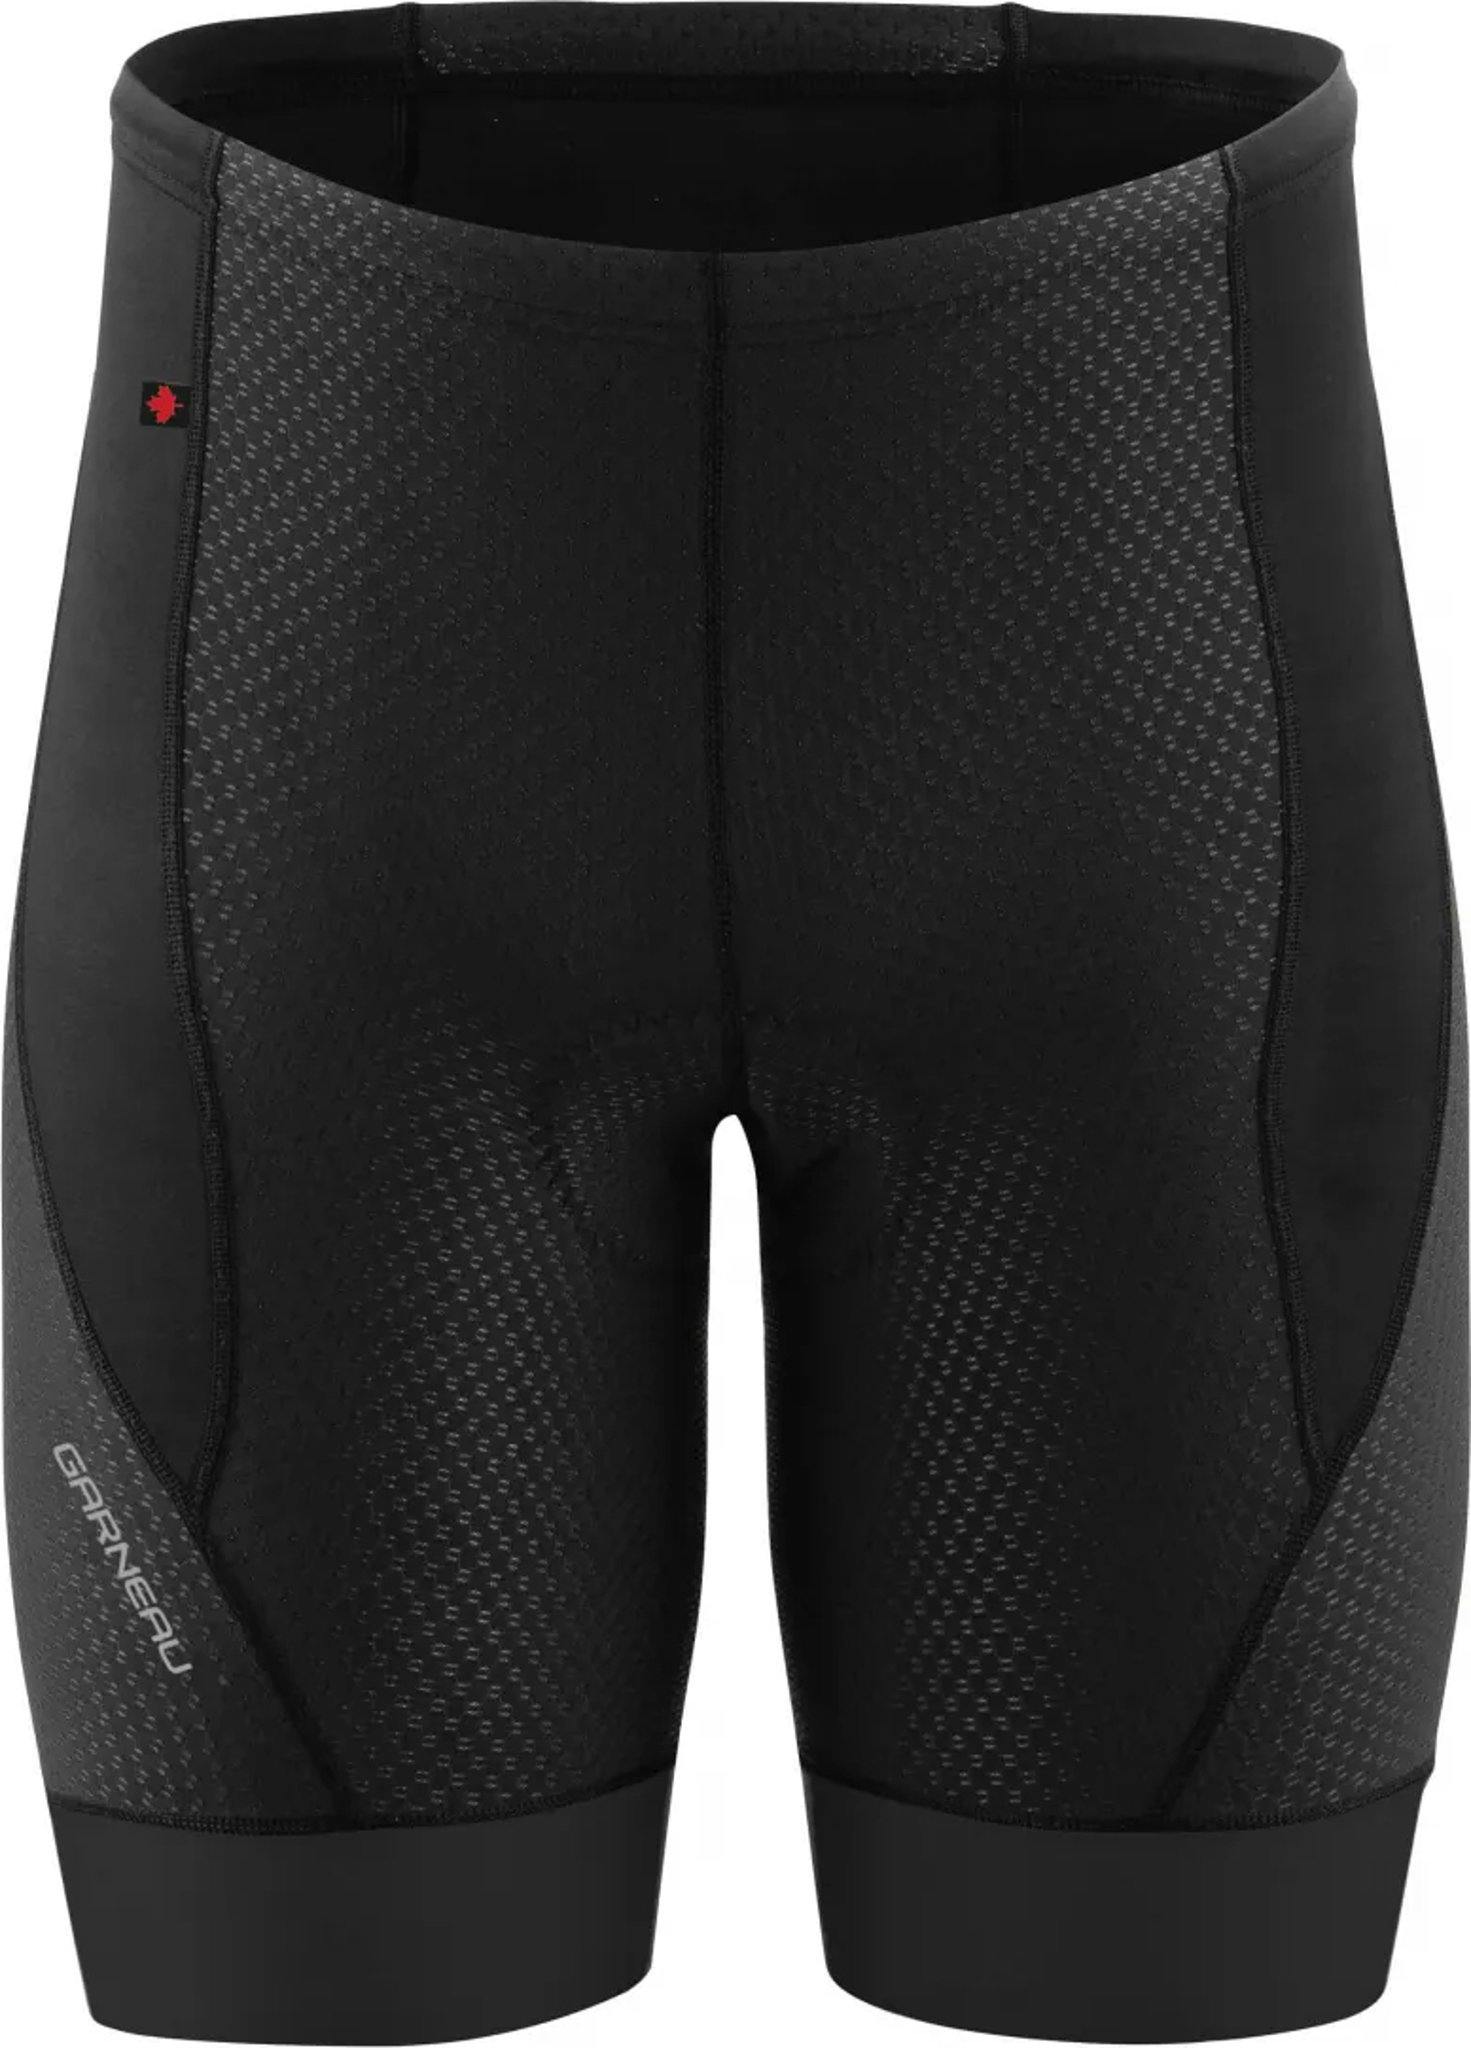 Product image for CB Carbon 2 Cycling Short - Men's